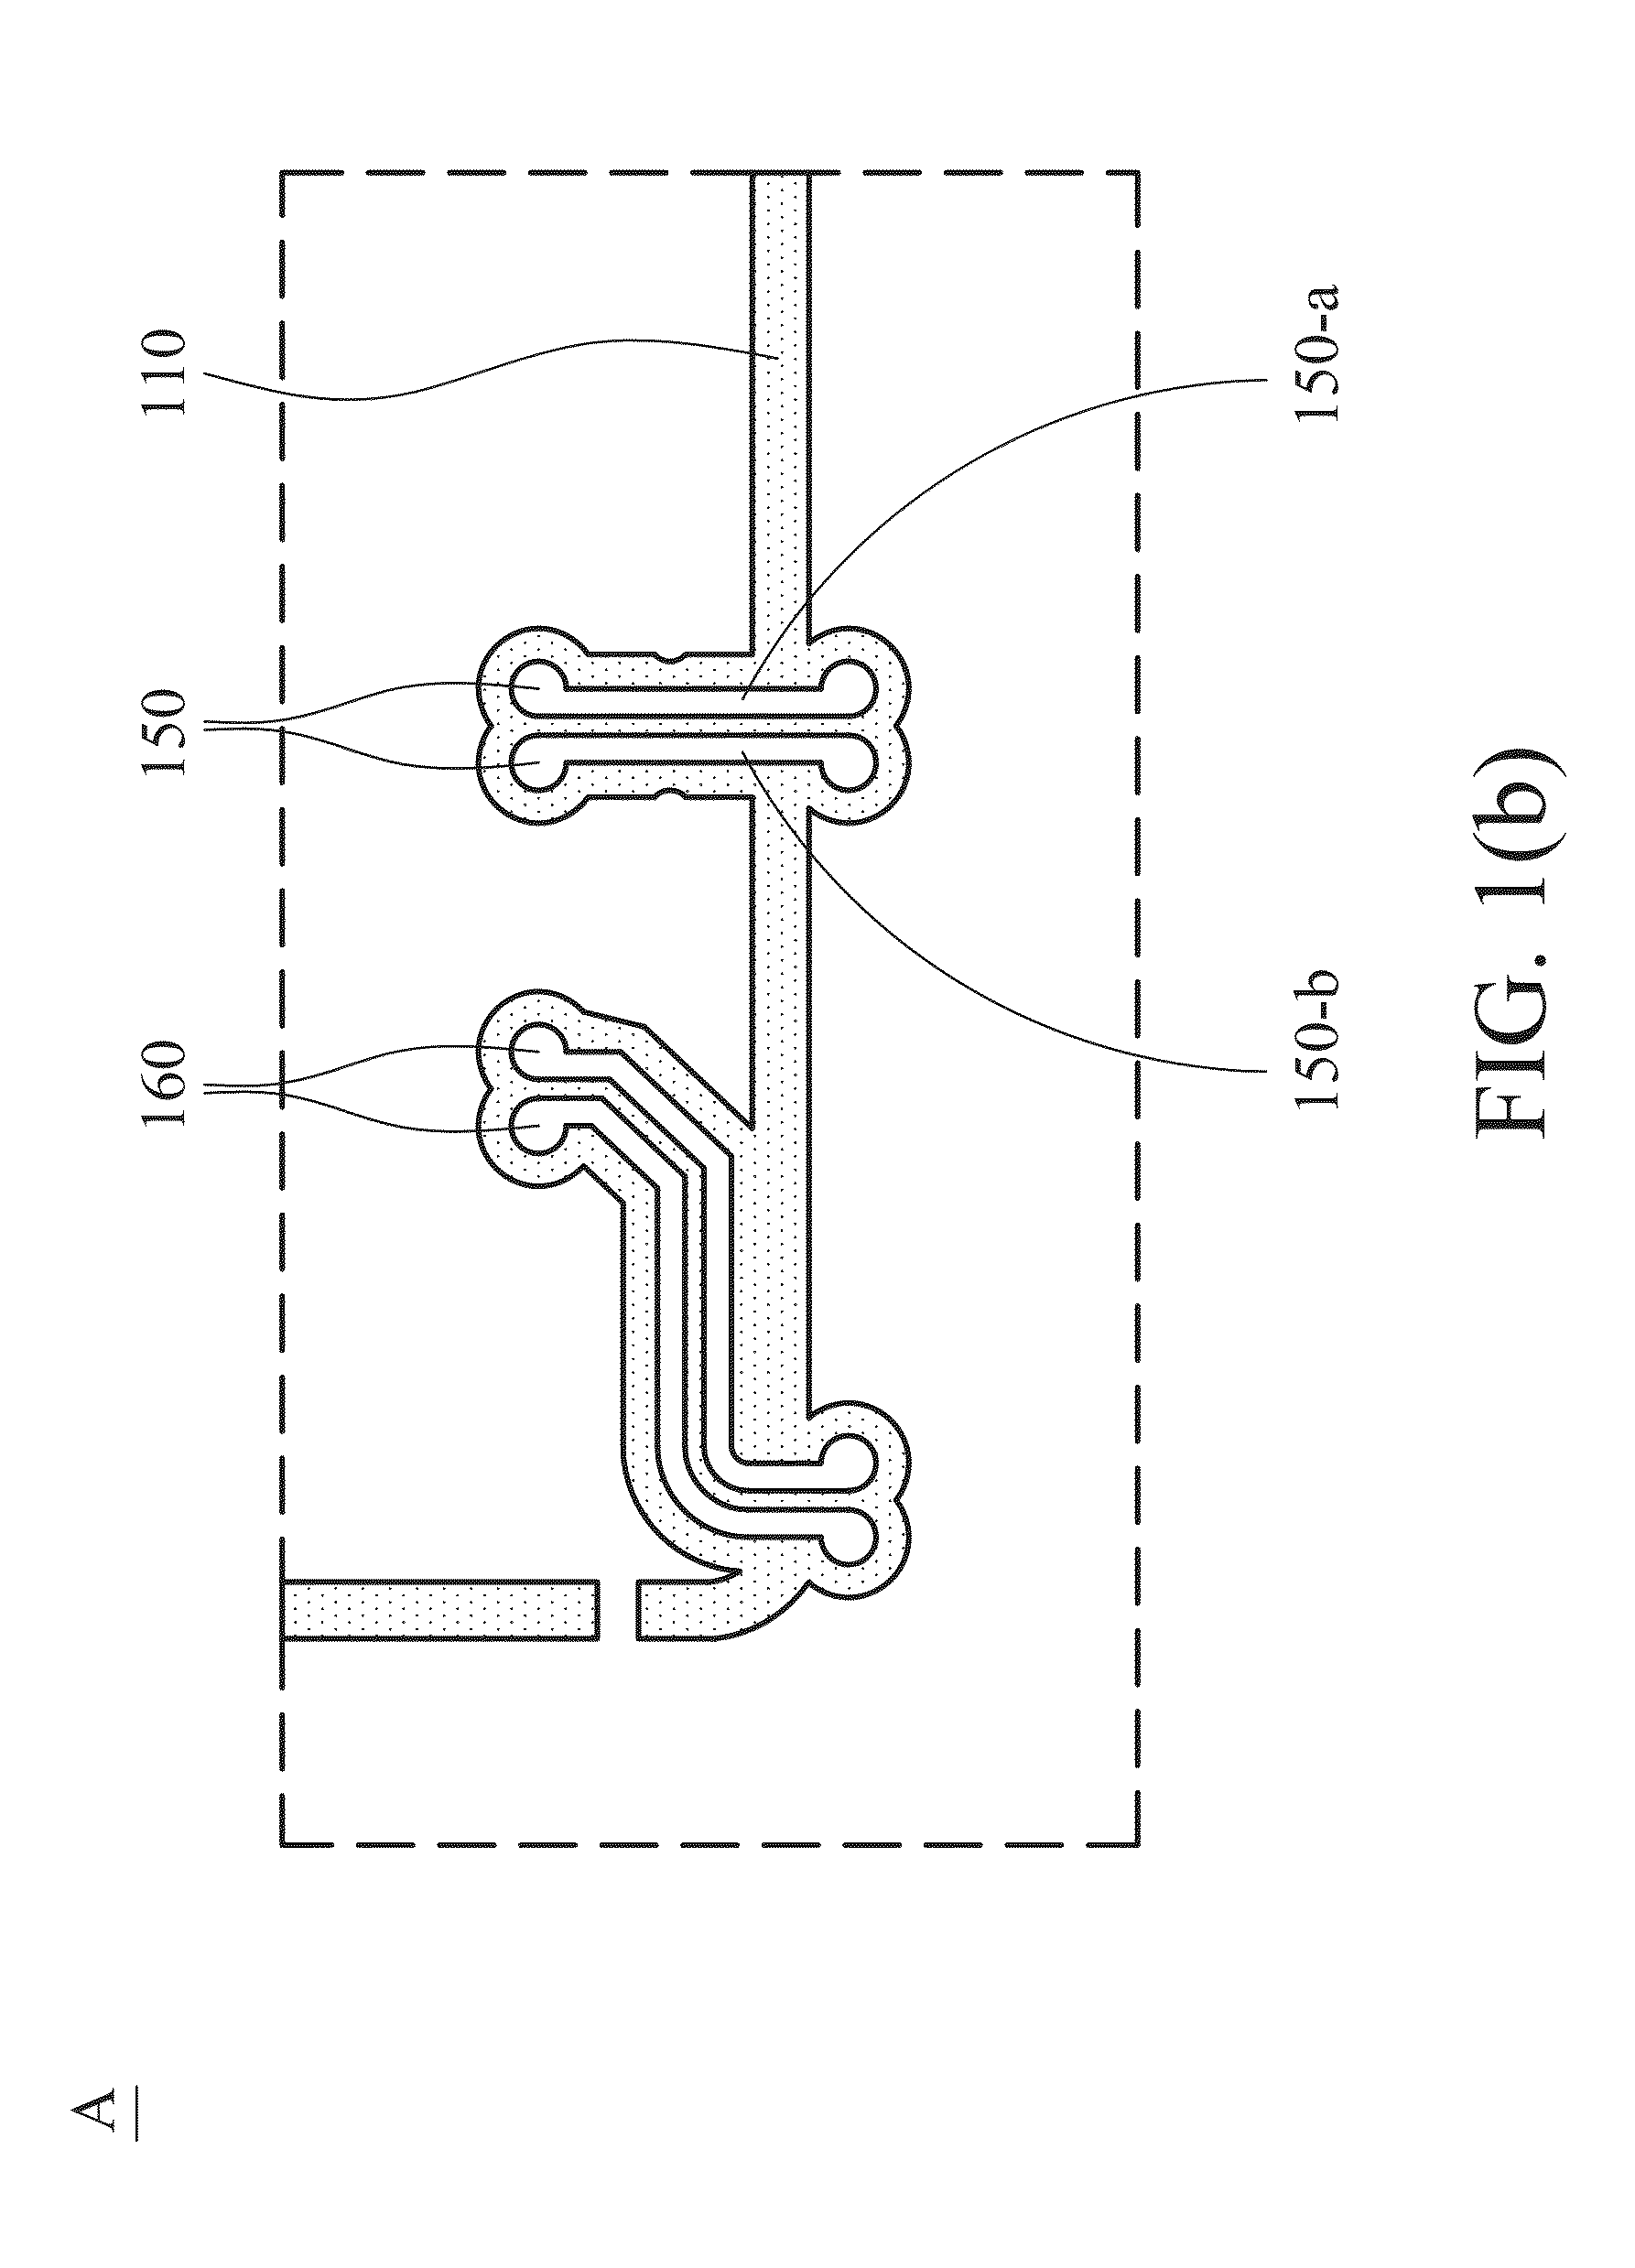 Device and grounding device for enhancing ems and wireless communication device